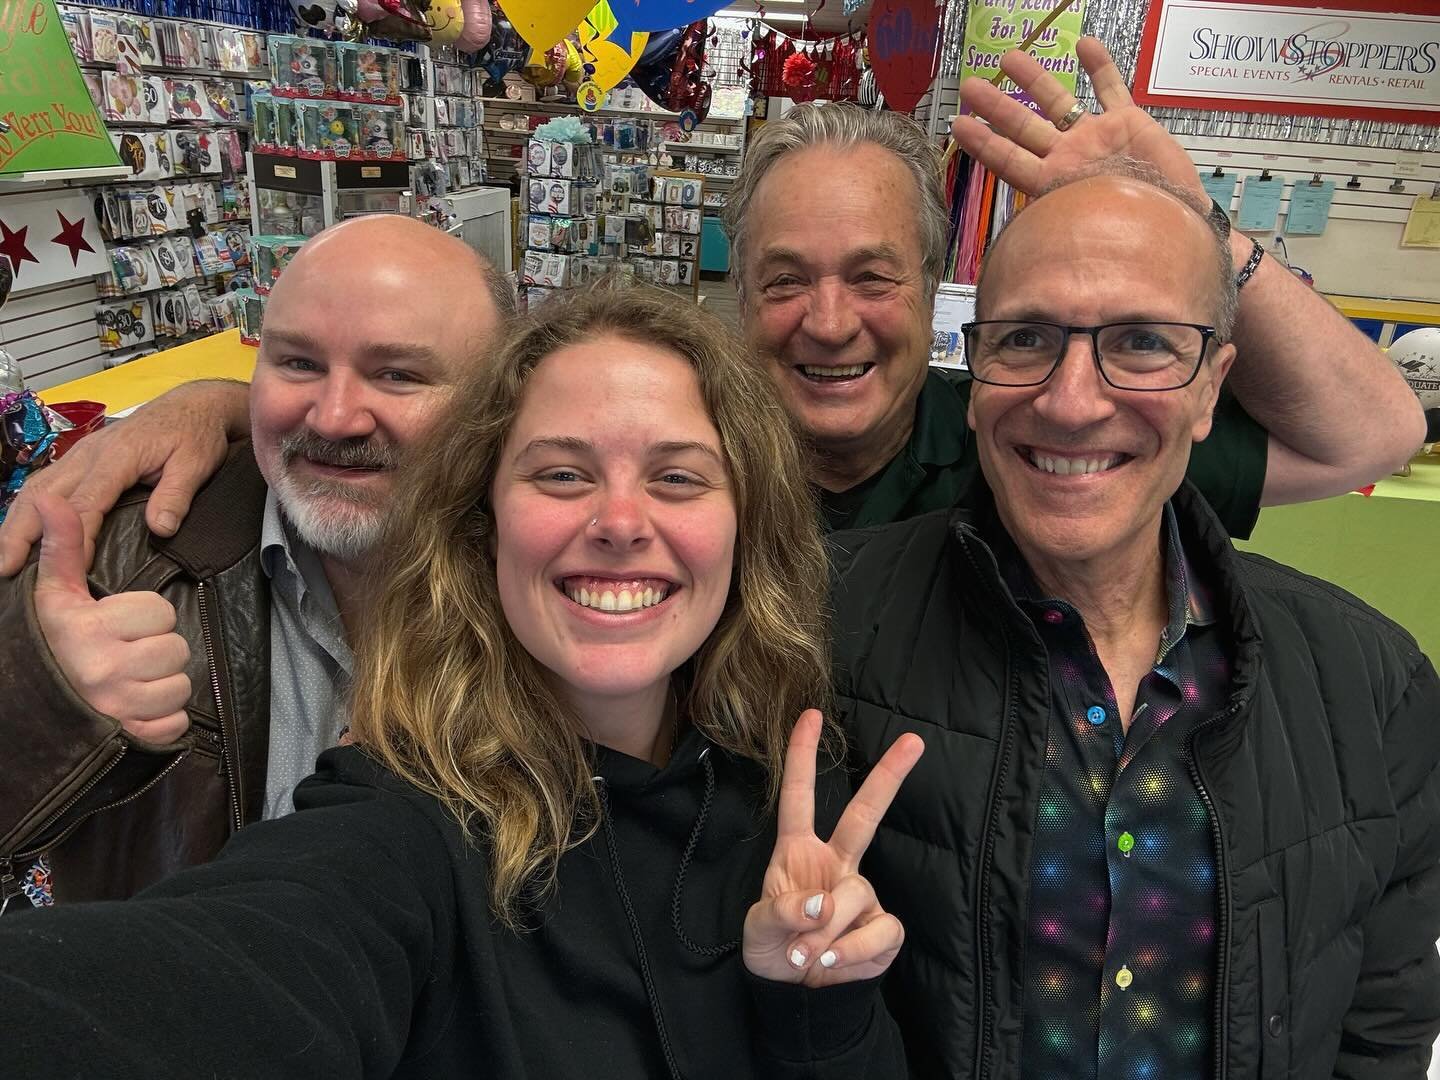 #sksnovelty #balloon #party 
Had a fun visit with Howard and Brian from SKS Novelty! Howard, as you slowly retire, know that your legacy of kindness and professionalism will continue to inspire us. May your next chapter be as rewarding as your career